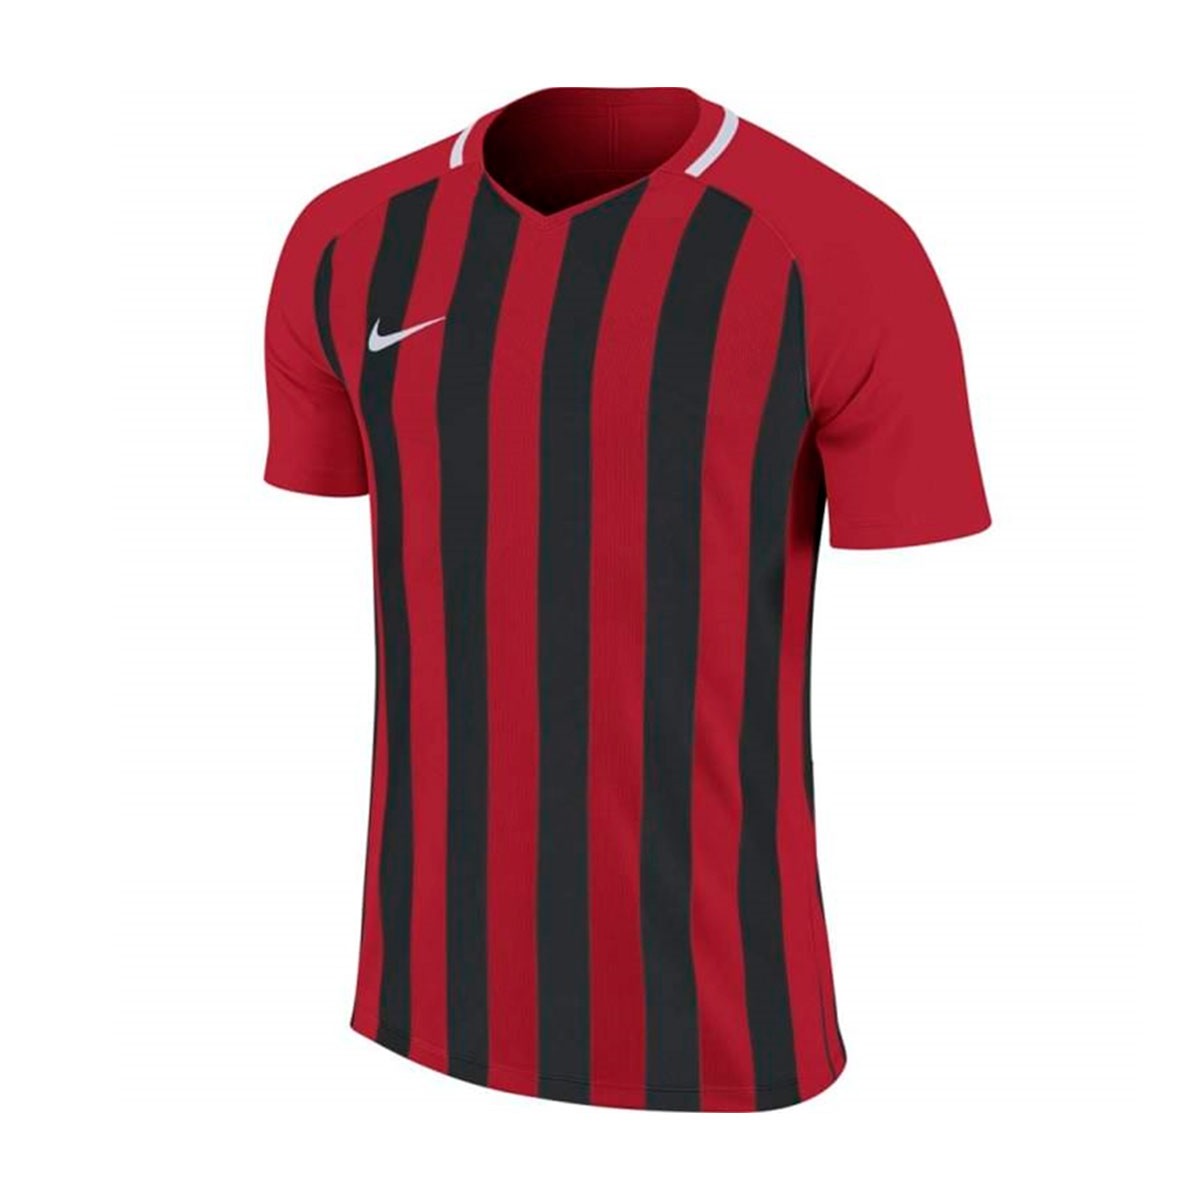 Jersey Nike Kids Striped Division III m 